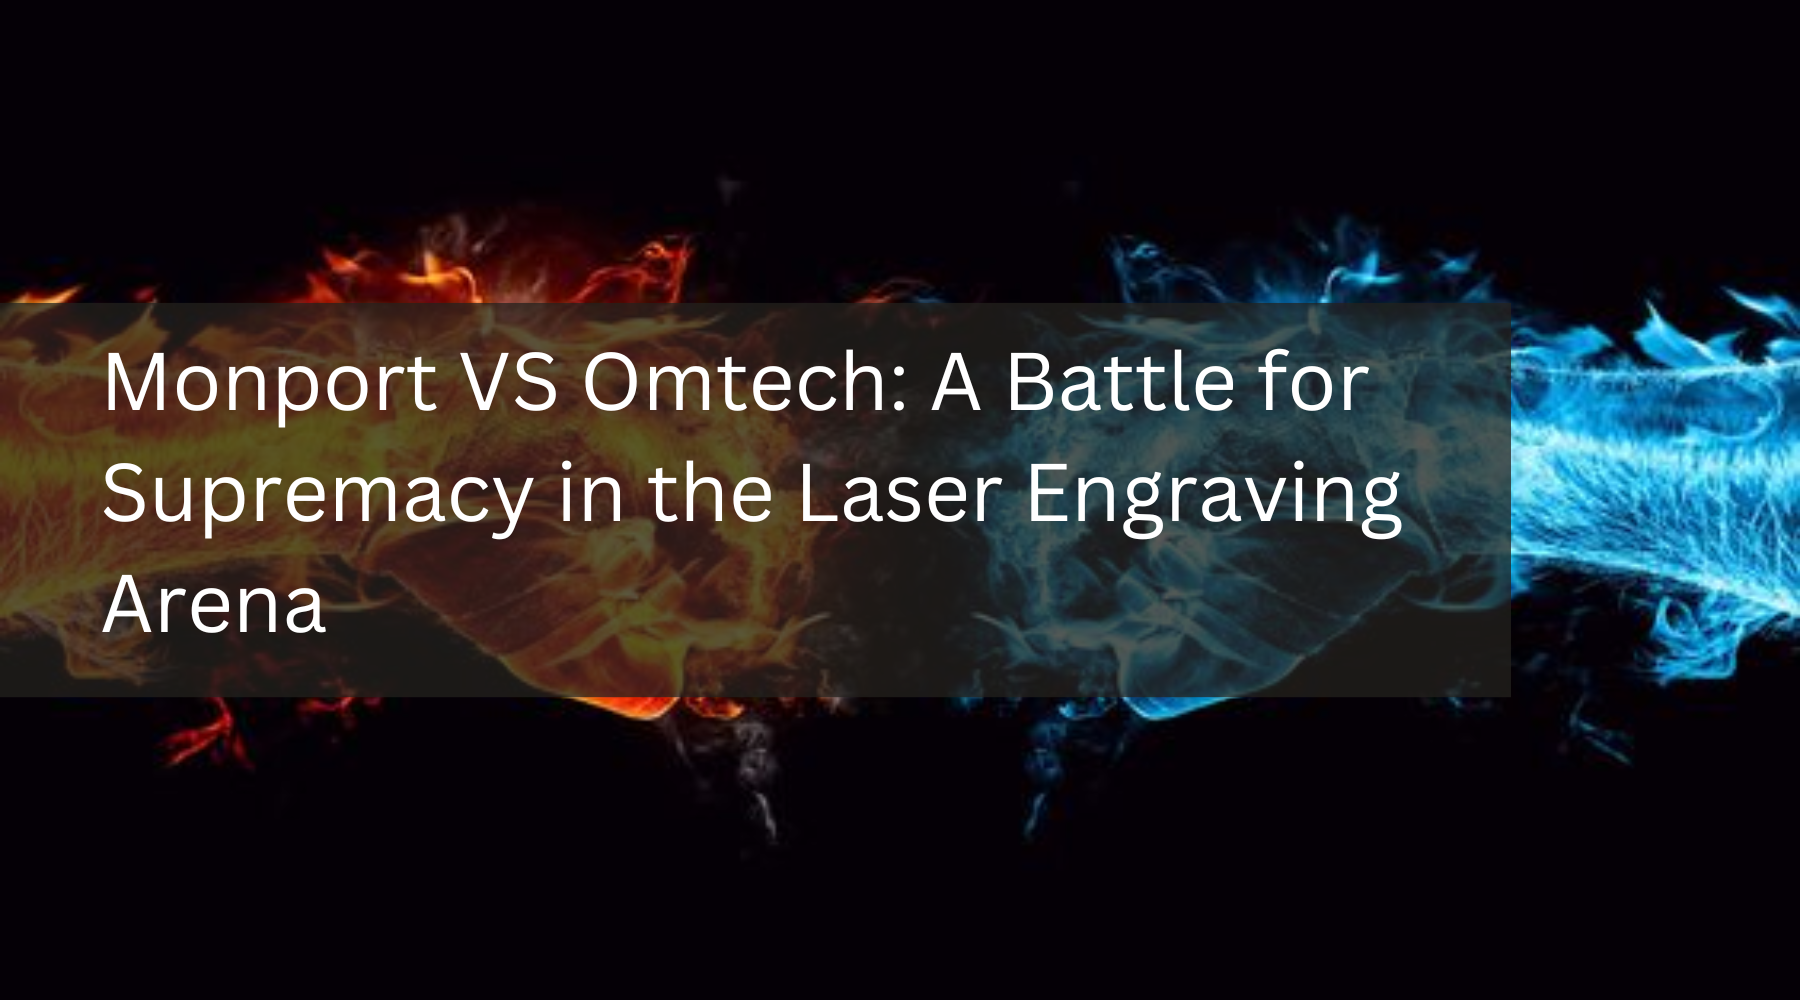 Monport VS Omtech: A Battle for Supremacy in the Laser Engraving Arena